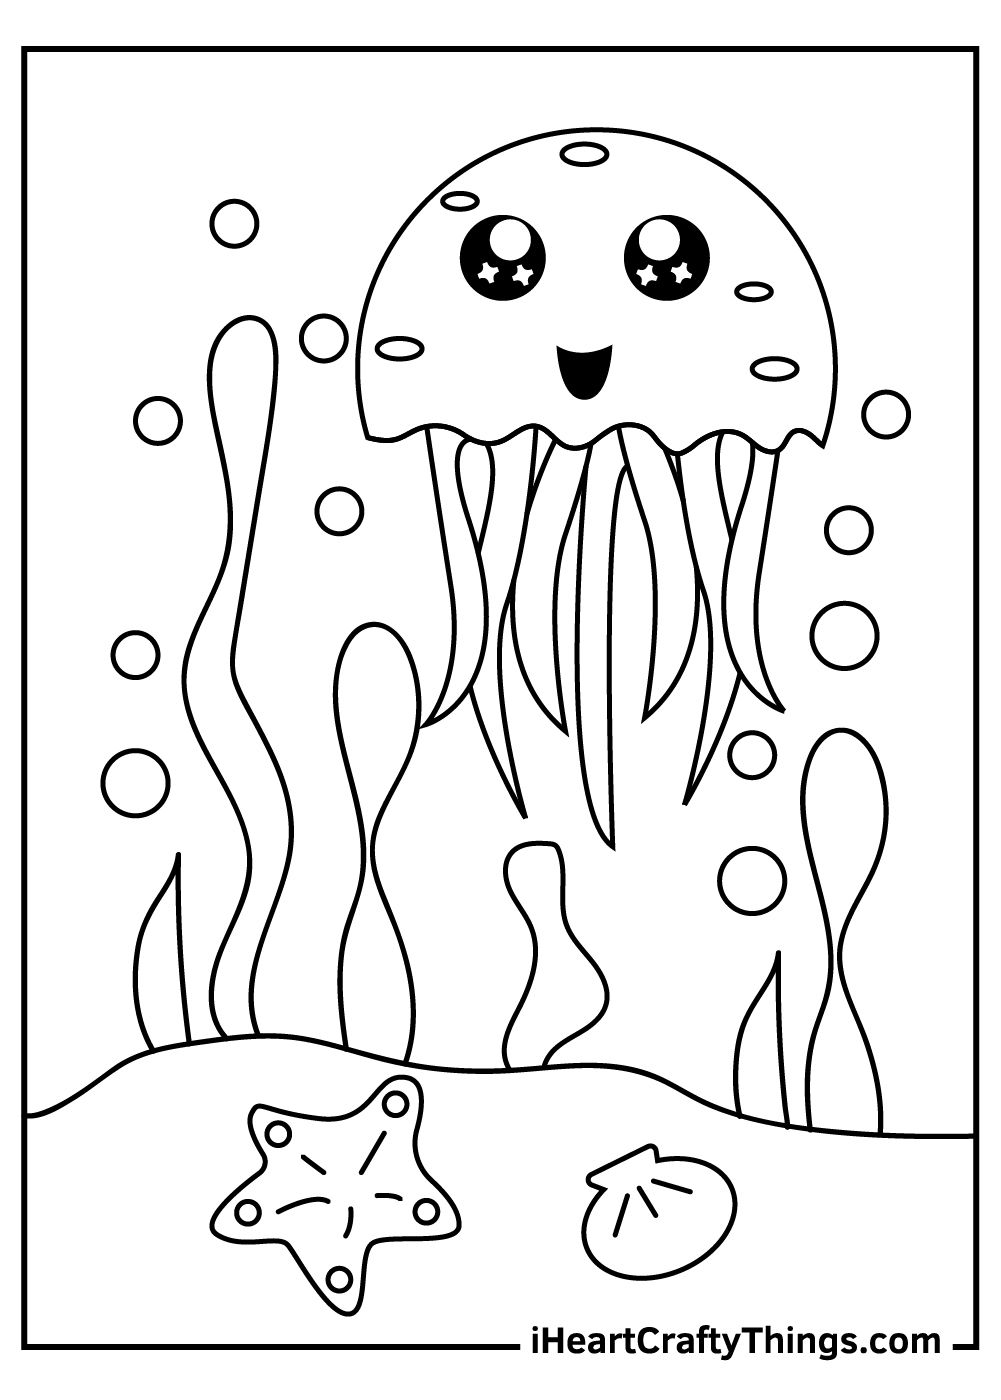 Jellyfish coloring pages unicorn coloring pages fish coloring page detailed coloring pages